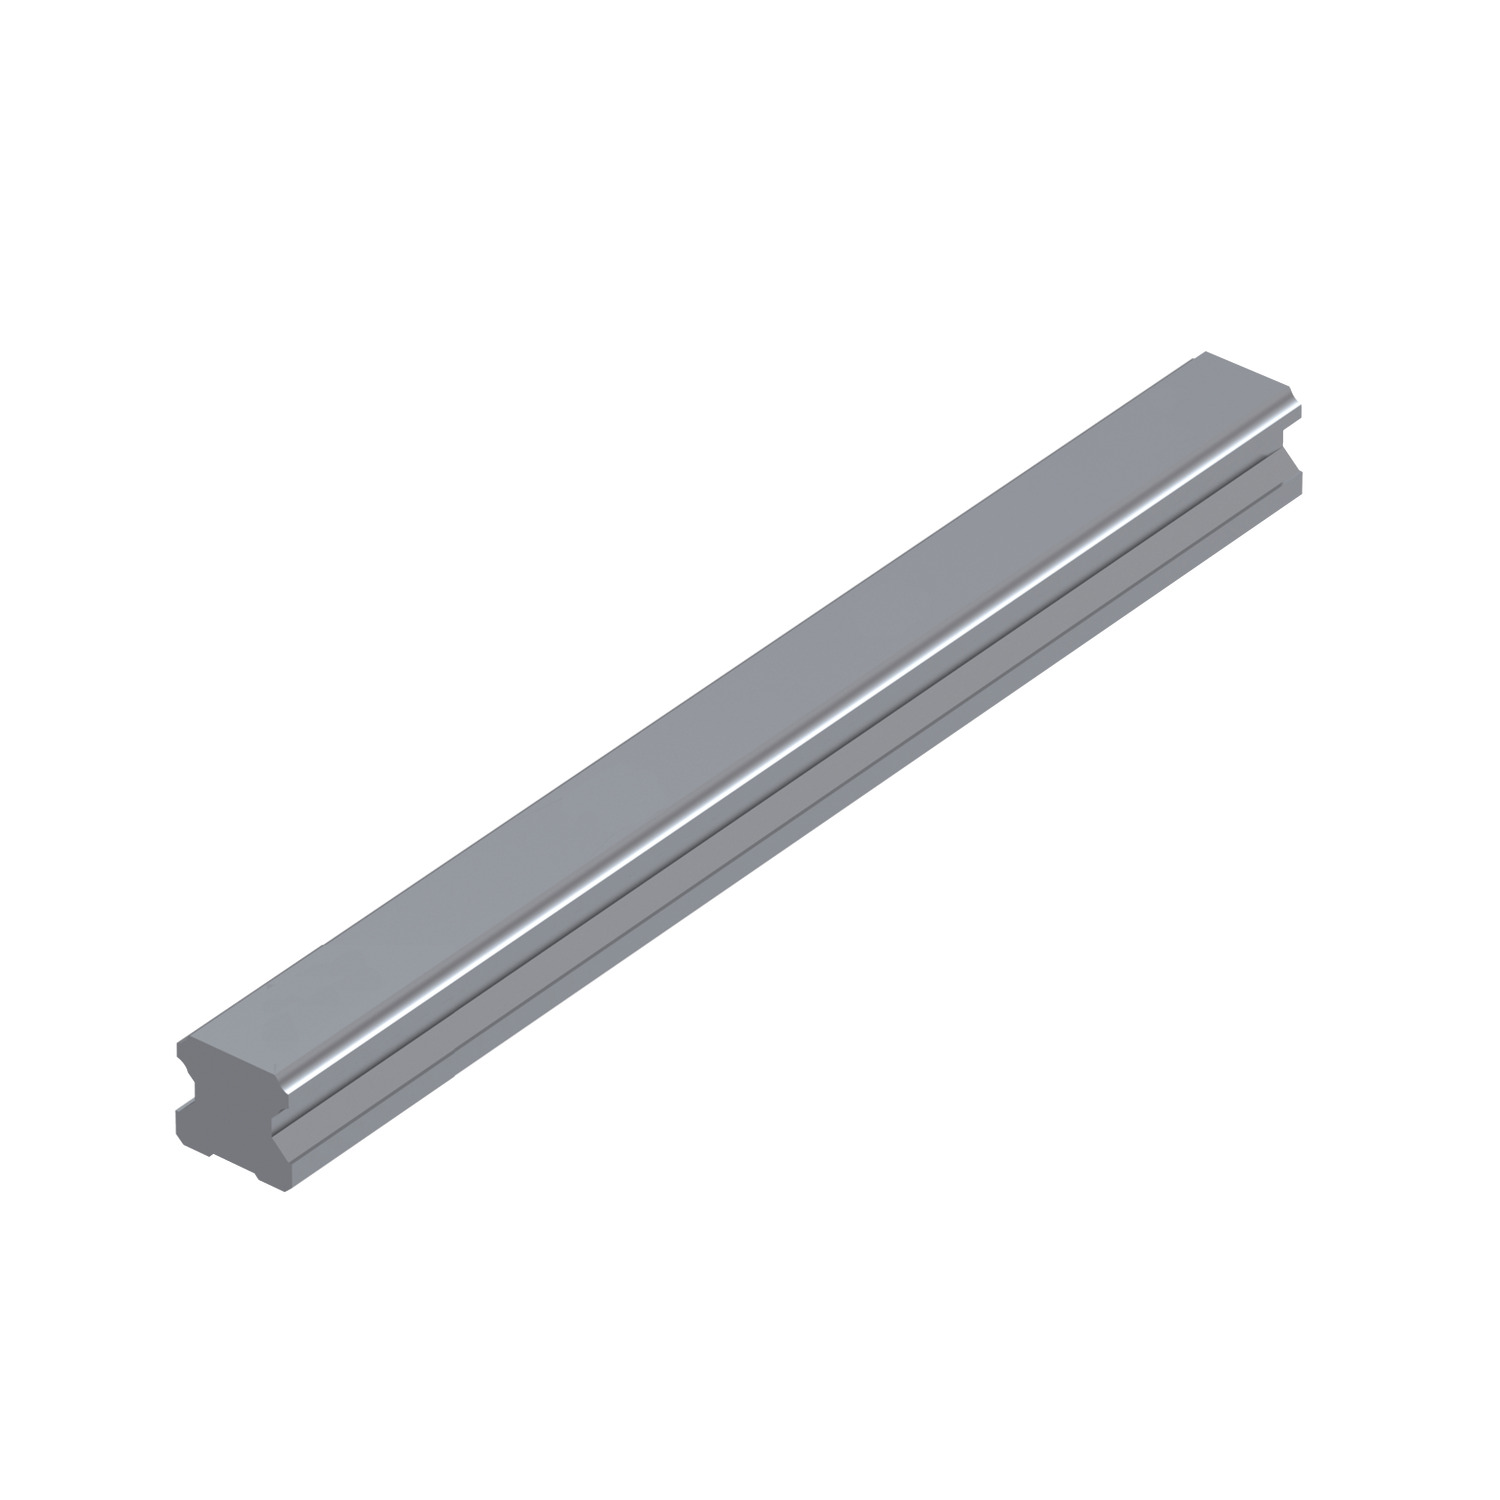 L1016.RF30-0200 Linear guide rail rear fixing 30mm 0200 Hardened and ground steel. EC:20167974 WG:05063055296625